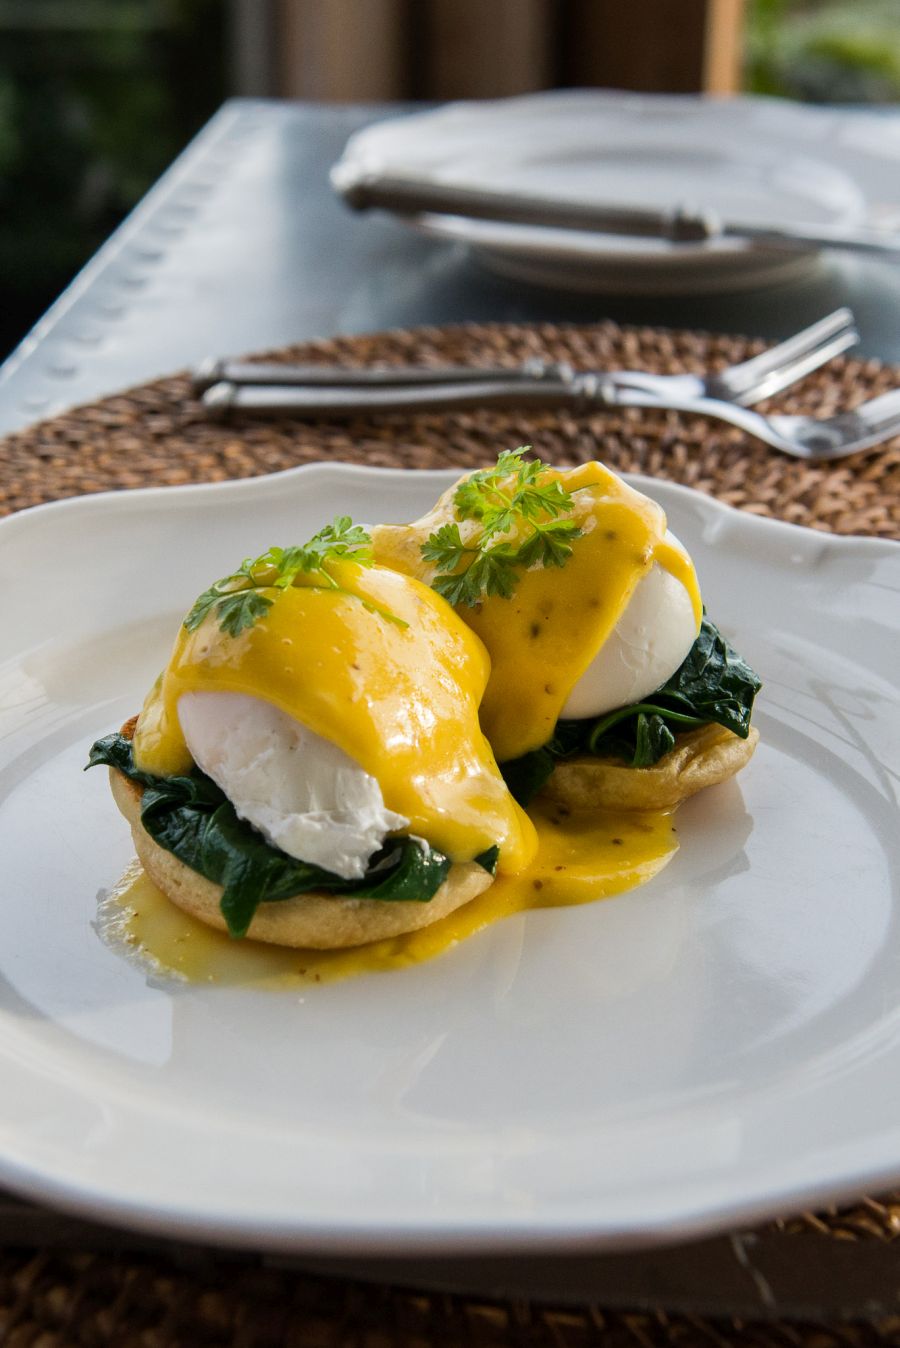 Eggs Benedict - with free range poached eggs, whole grain mustard hollandaise and spinach